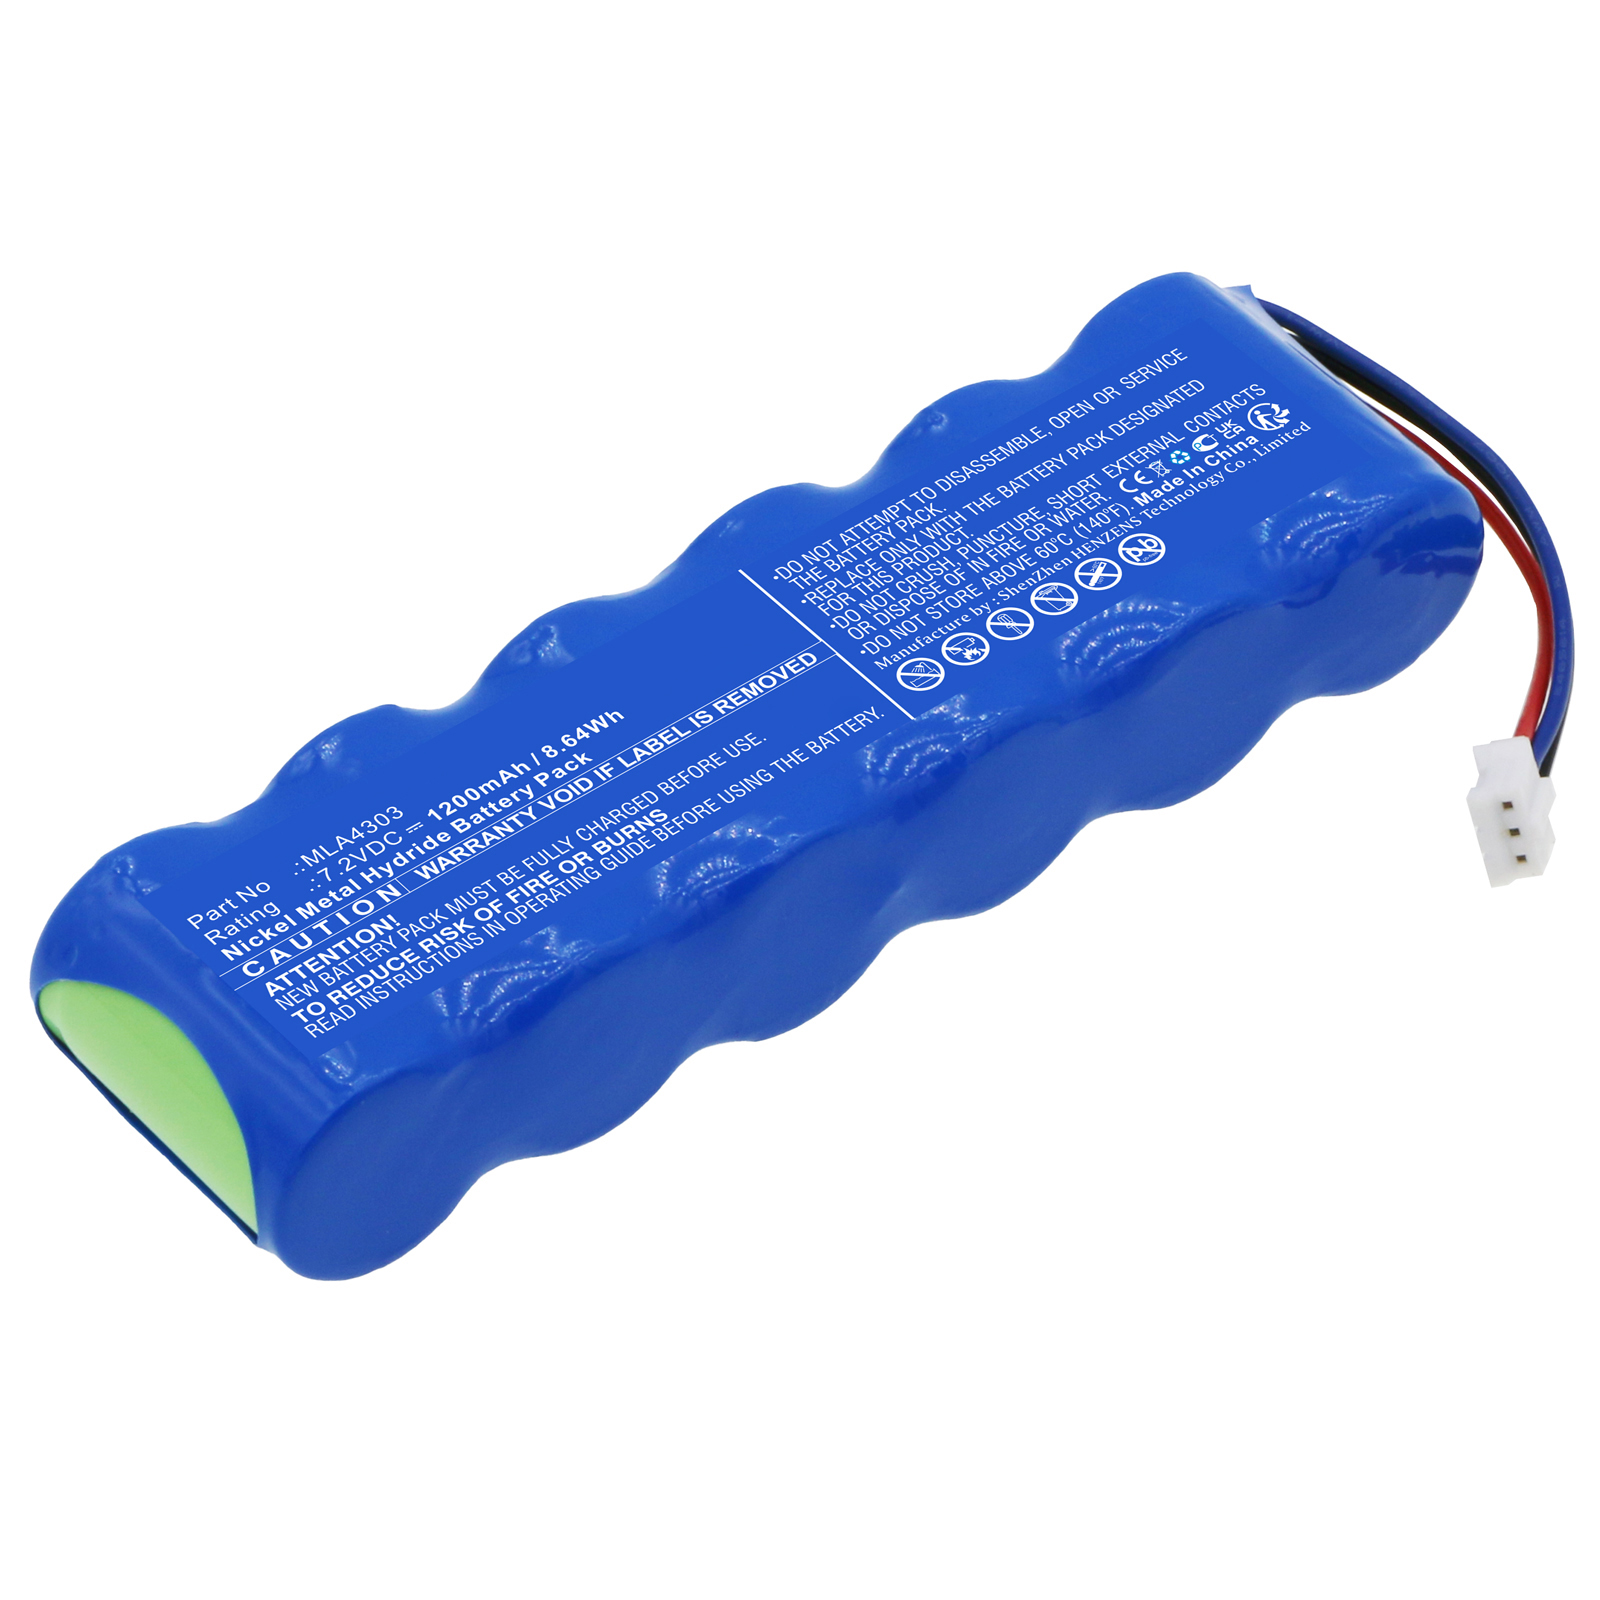 Synergy Digital Medical Battery, Compatible with Micro Medical MLA4303 Medical Battery (Ni-MH, 7.2V, 1200mAh)